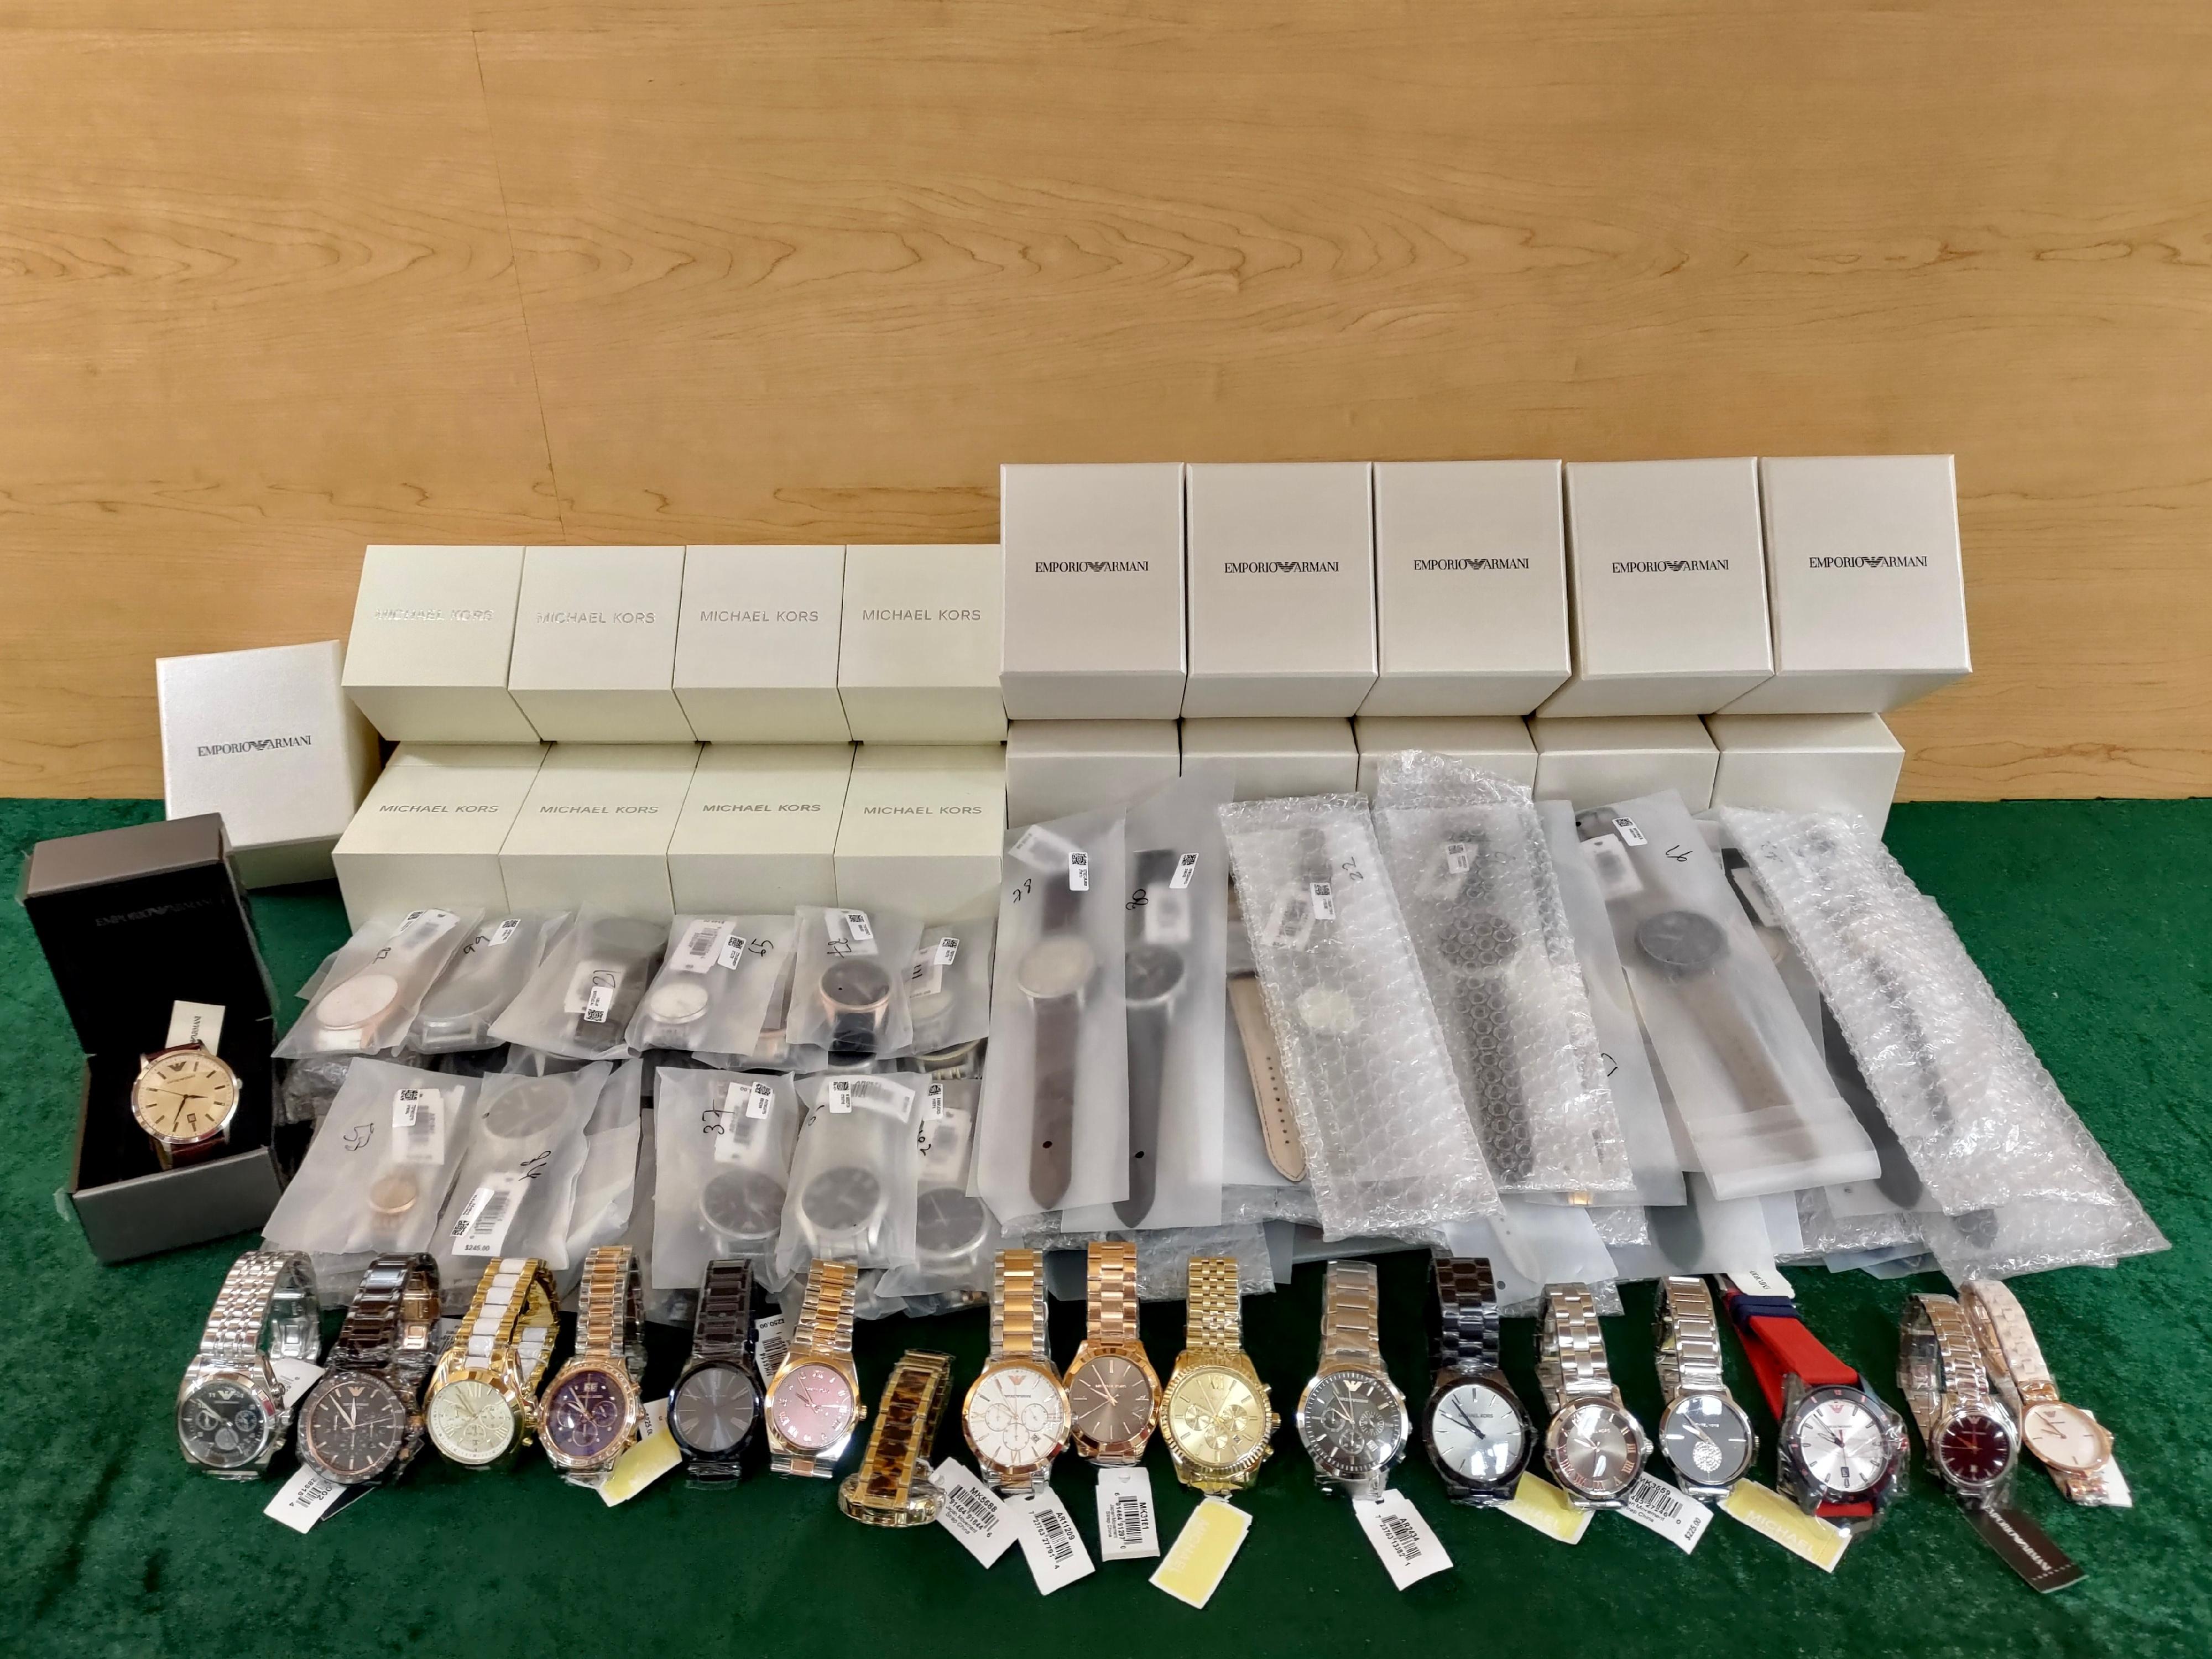 Hong Kong Custom yesterday (August 31) conducted a special enforcement operation to combat the sale of counterfeit watches and seized about 500 suspected counterfeit watches with an estimated market value of about $600,000. Photo shows some of the suspected counterfeit watches seized.